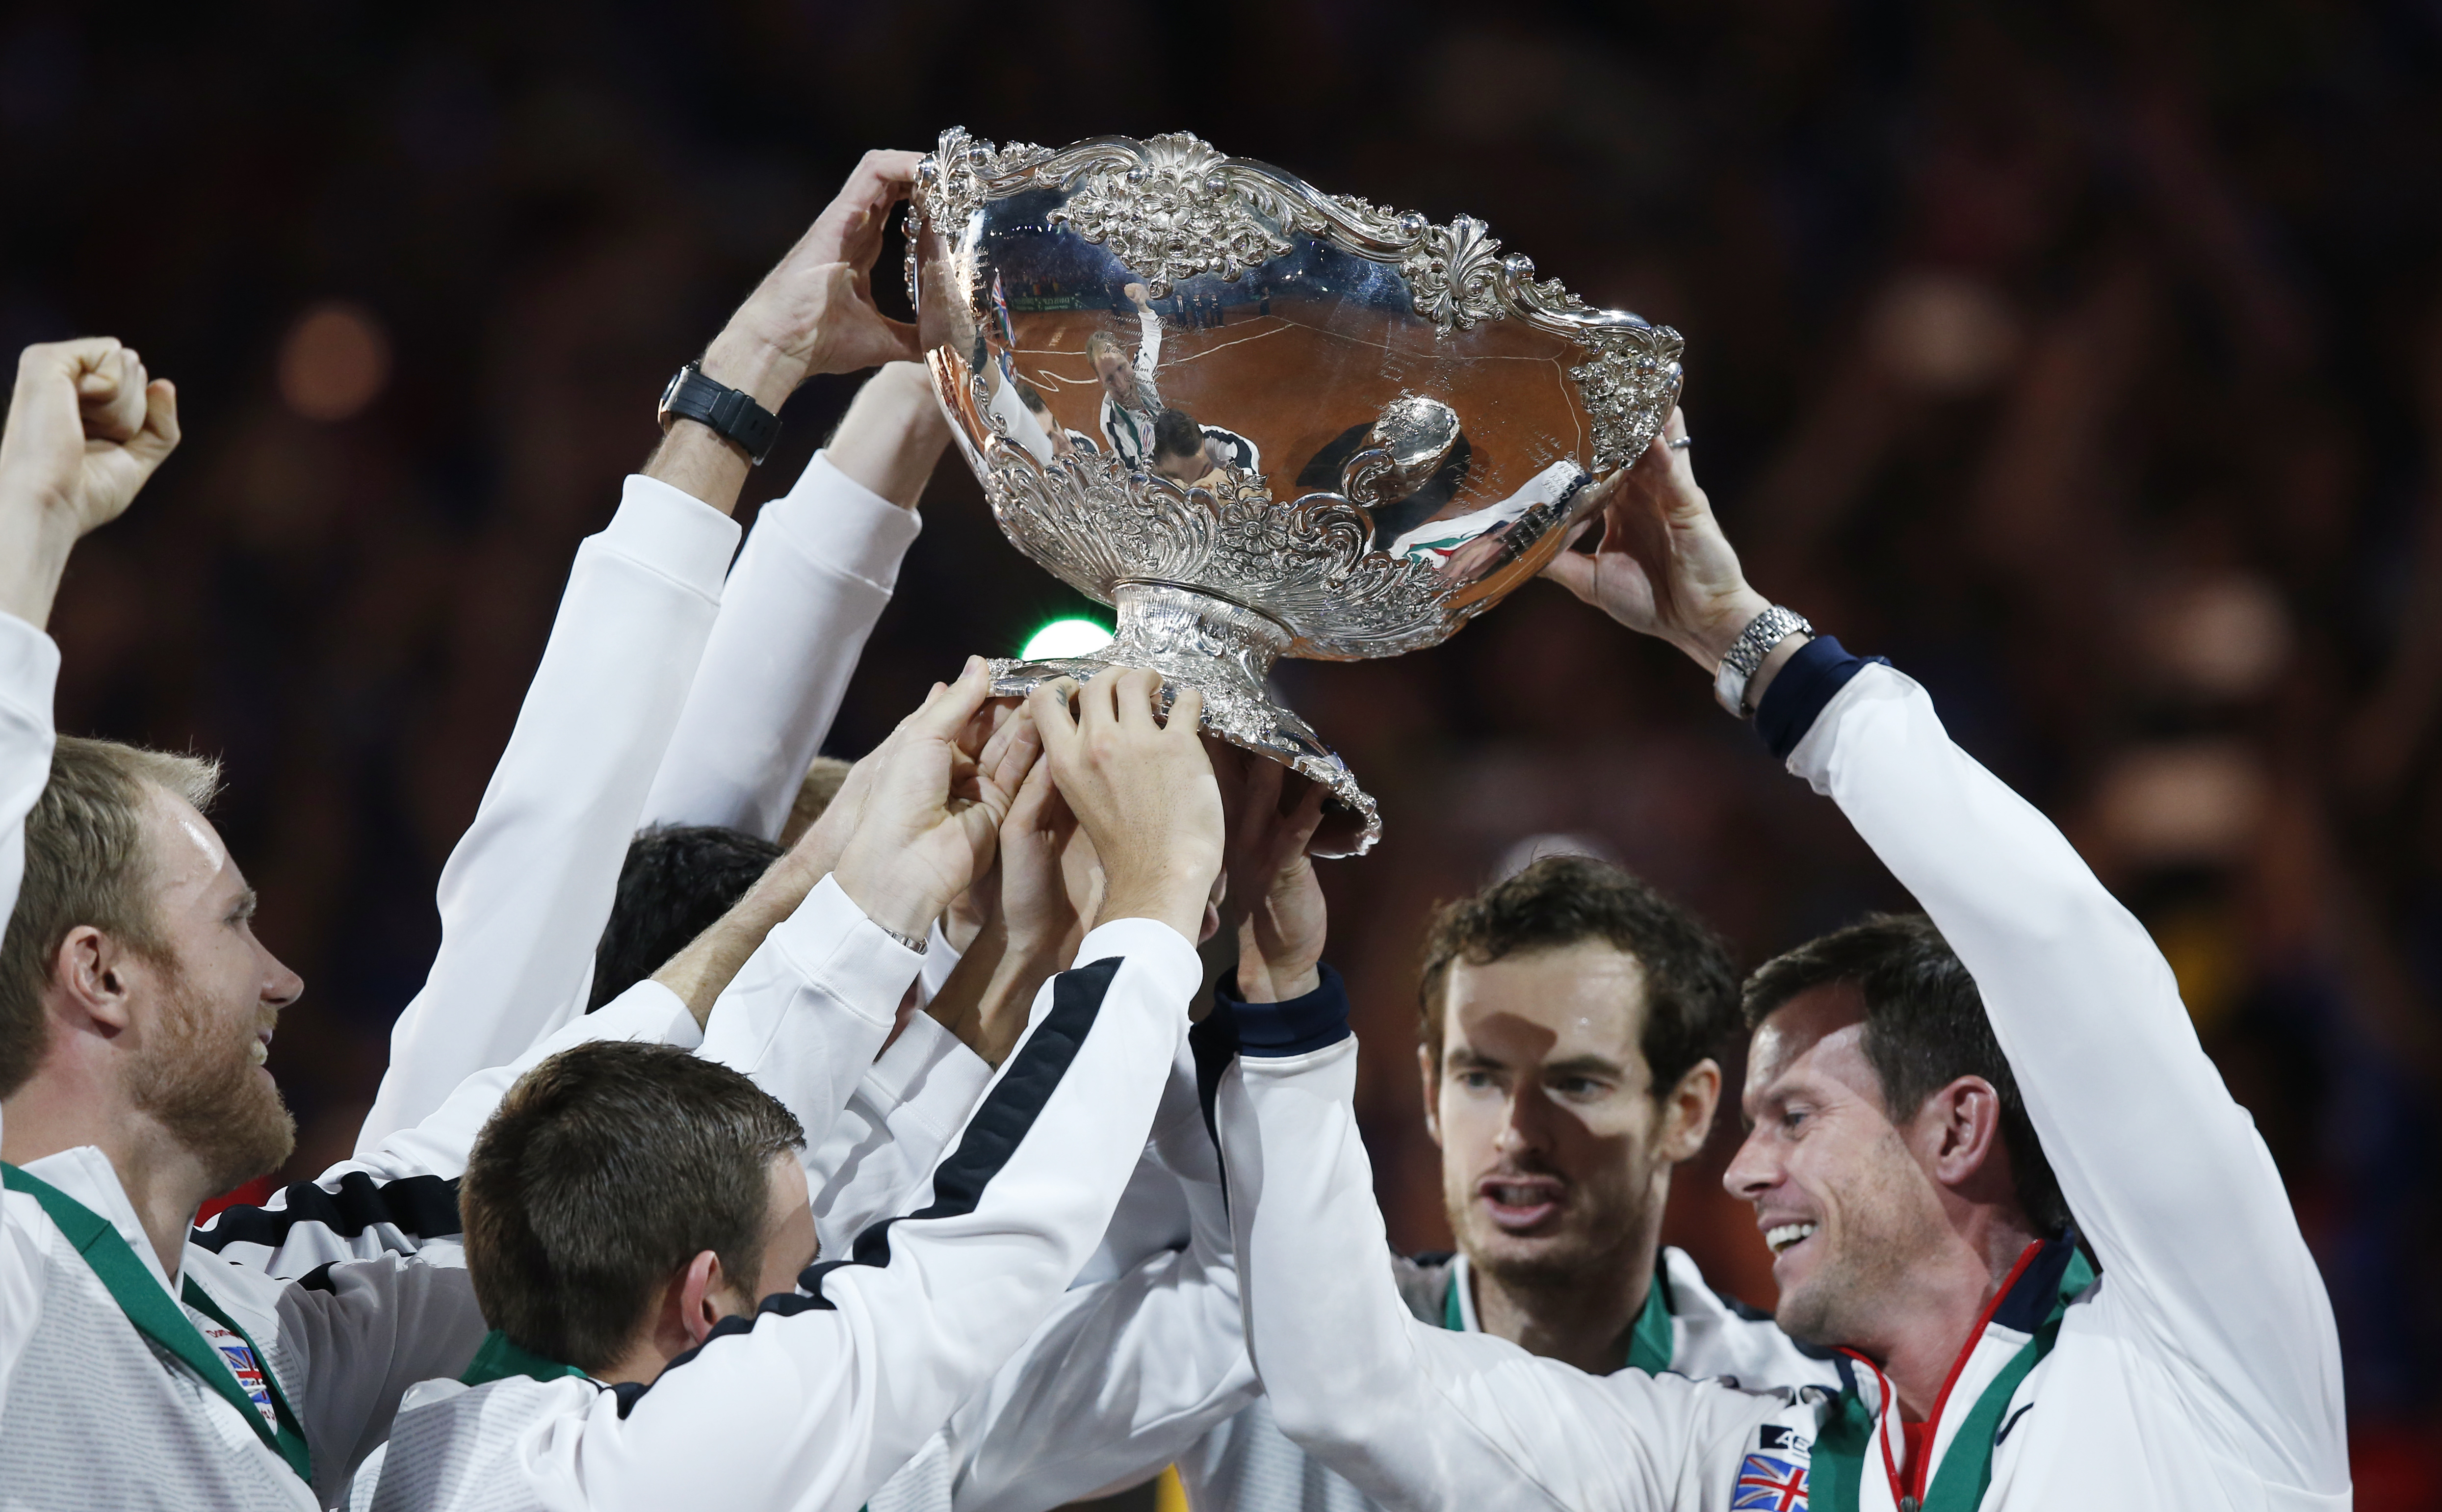 Tennis - Belgium v Great Britain - Davis Cup Final - Flanders Expo, Ghent, Belgium - 29/11/15 Men's Singles - Great Britain's Daniel Evans, Dominic Inglot, Jamie Murray, James Ward, Kyle Edmund, Andy Murray and captain Leon Smith celebrate with the trophy after winning the Davis Cup Reuters / Francois Lenoir Livepic